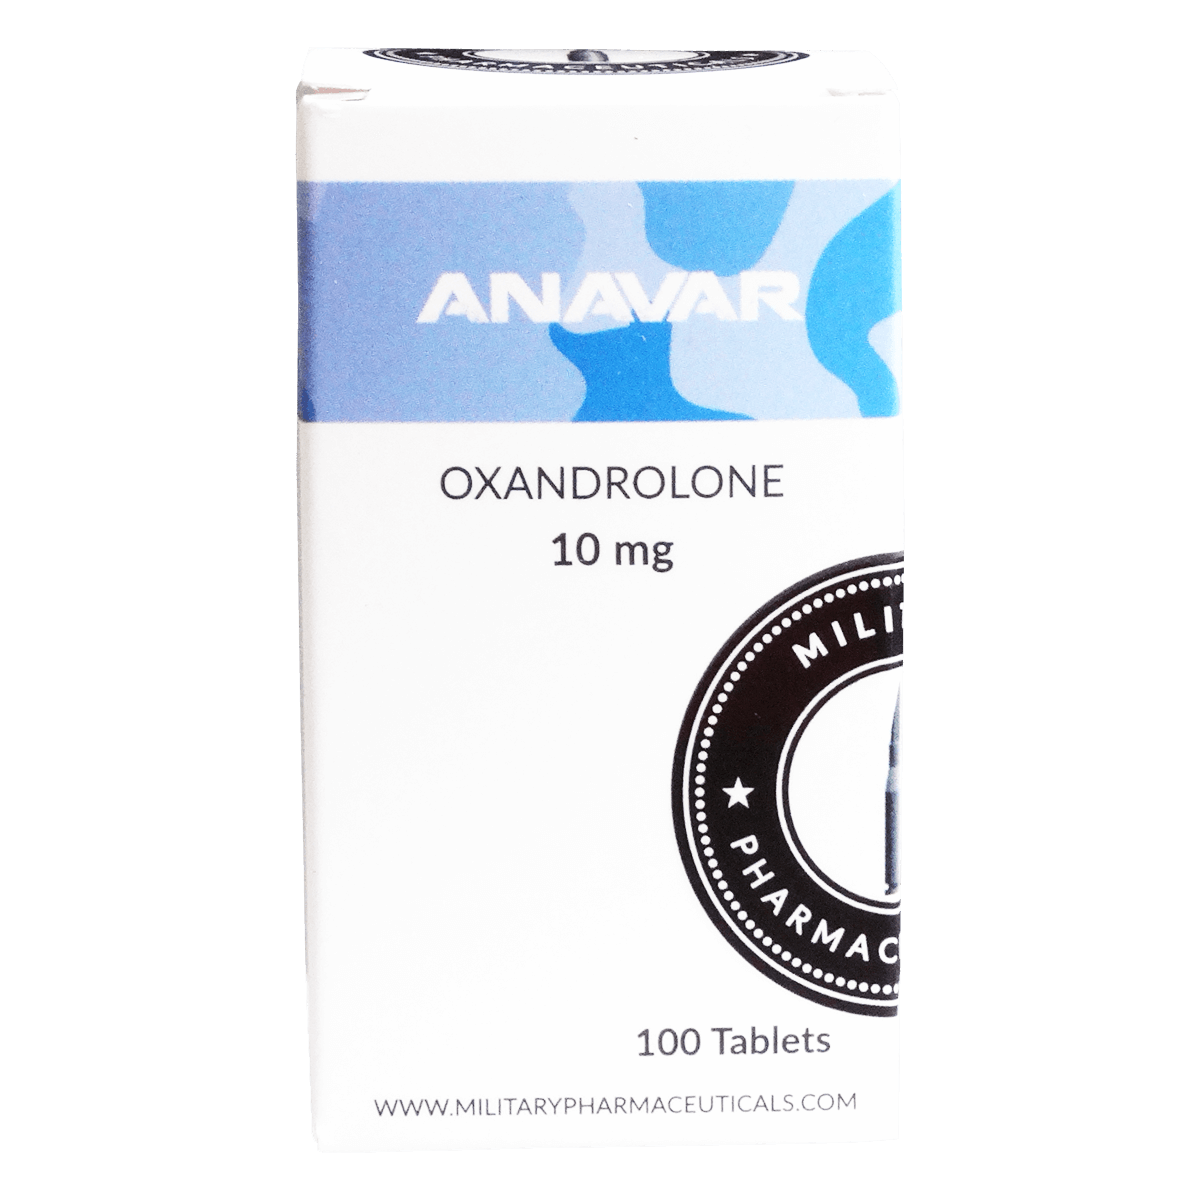 Military_Pharma_Anavar_Oral_Anabolic_Steroid_Androgenic_Fat_Clean_Oxandrolone_oral_Tablets_Lean_muscle_mass_Strength_xsf_group